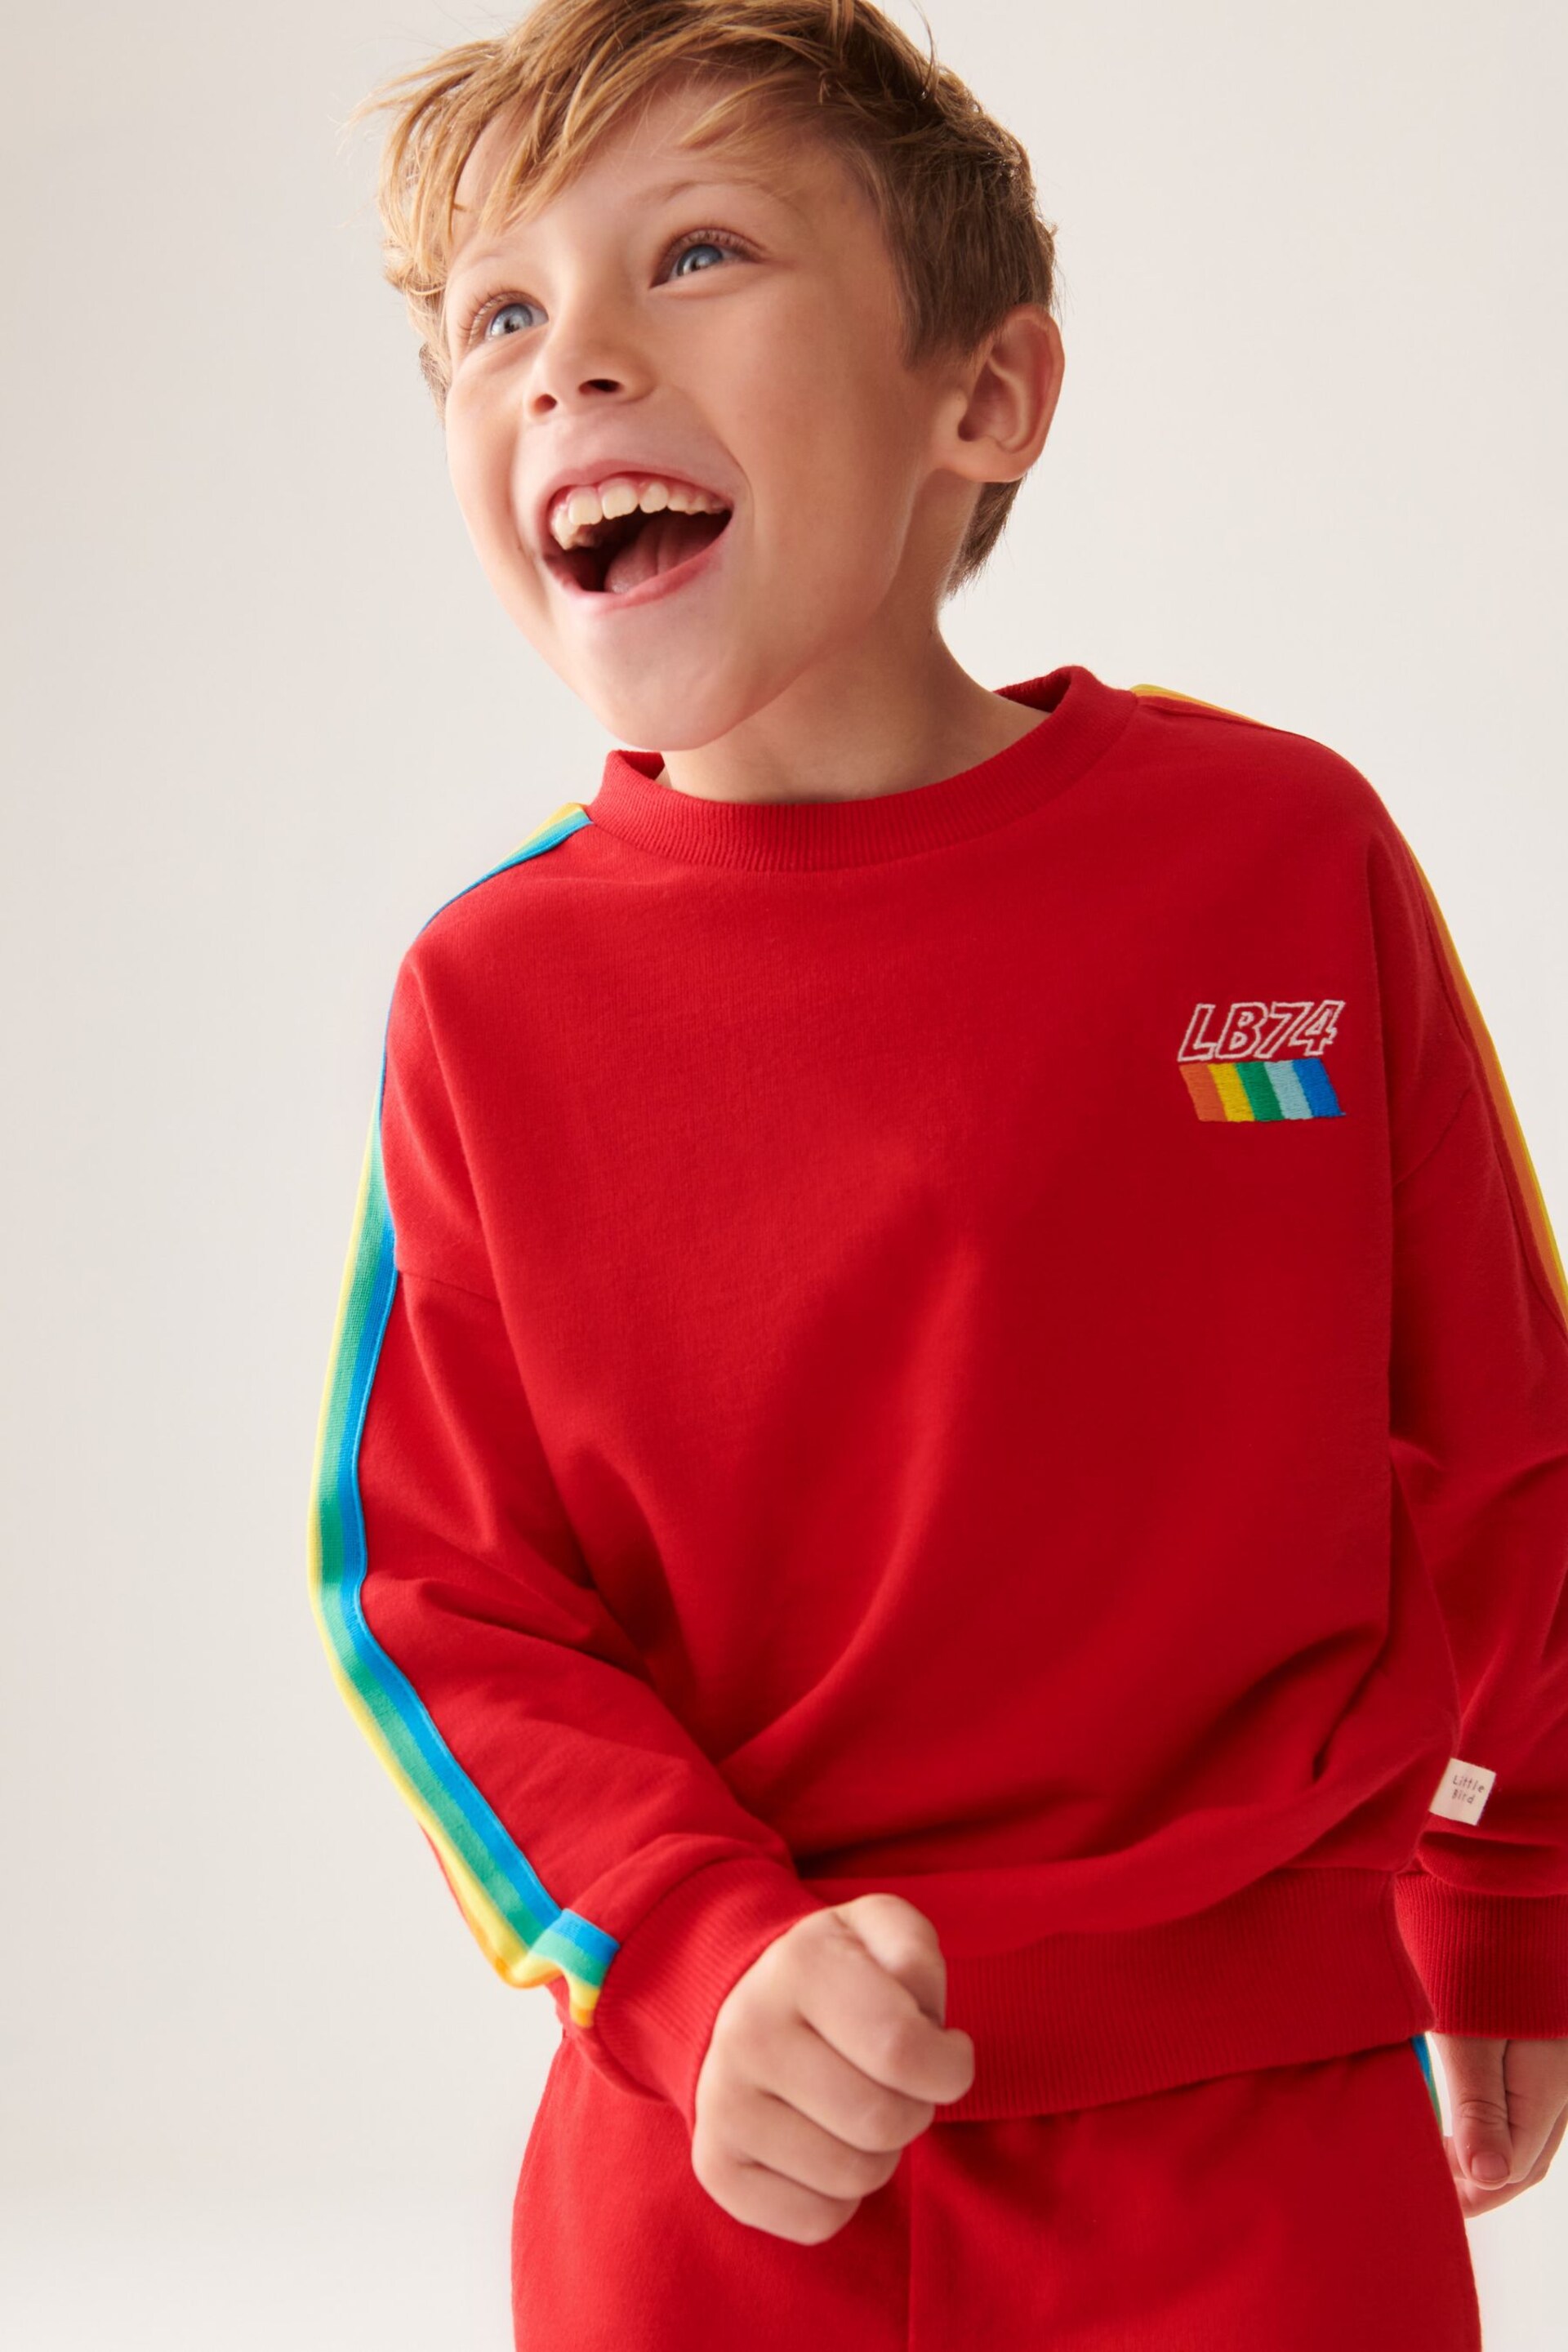 Little Bird by Jools Oliver Red Rainbow Sweat Top and Short Set - Image 6 of 14